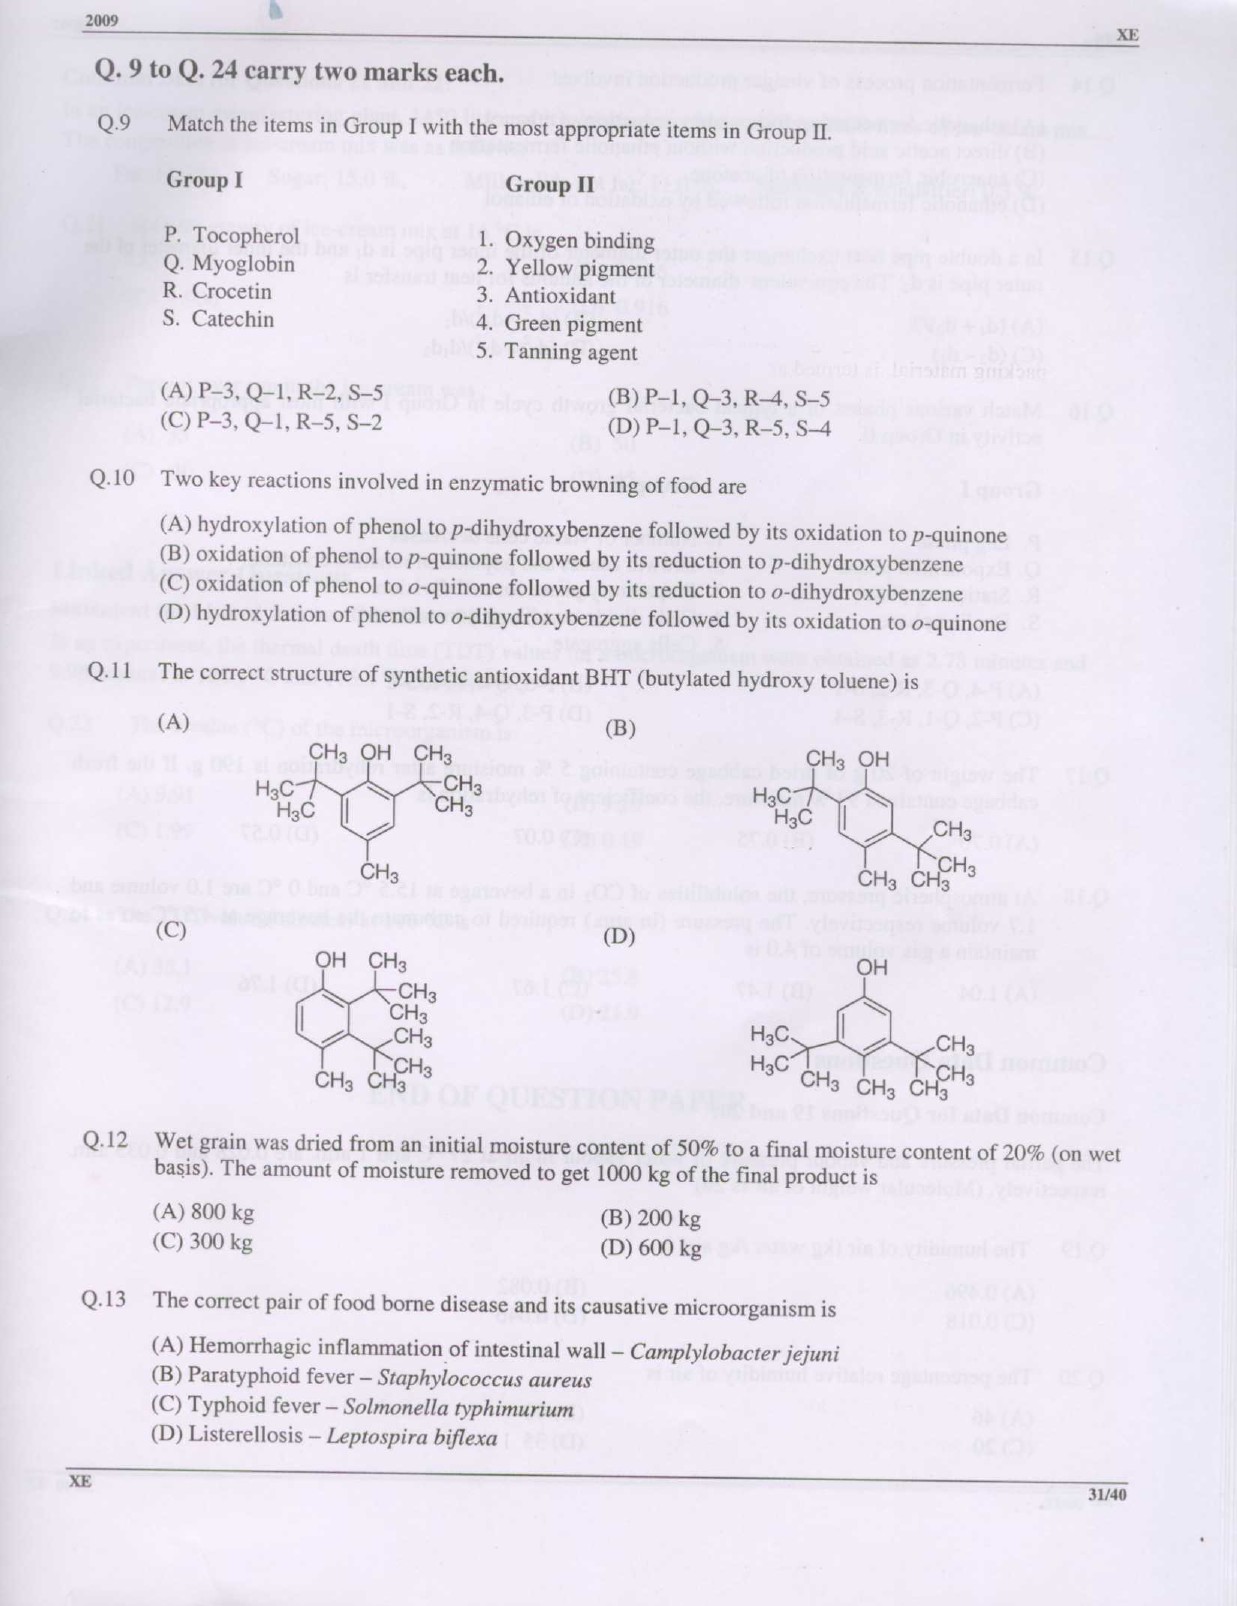 GATE Exam Question Paper 2009 Engineering Sciences 31